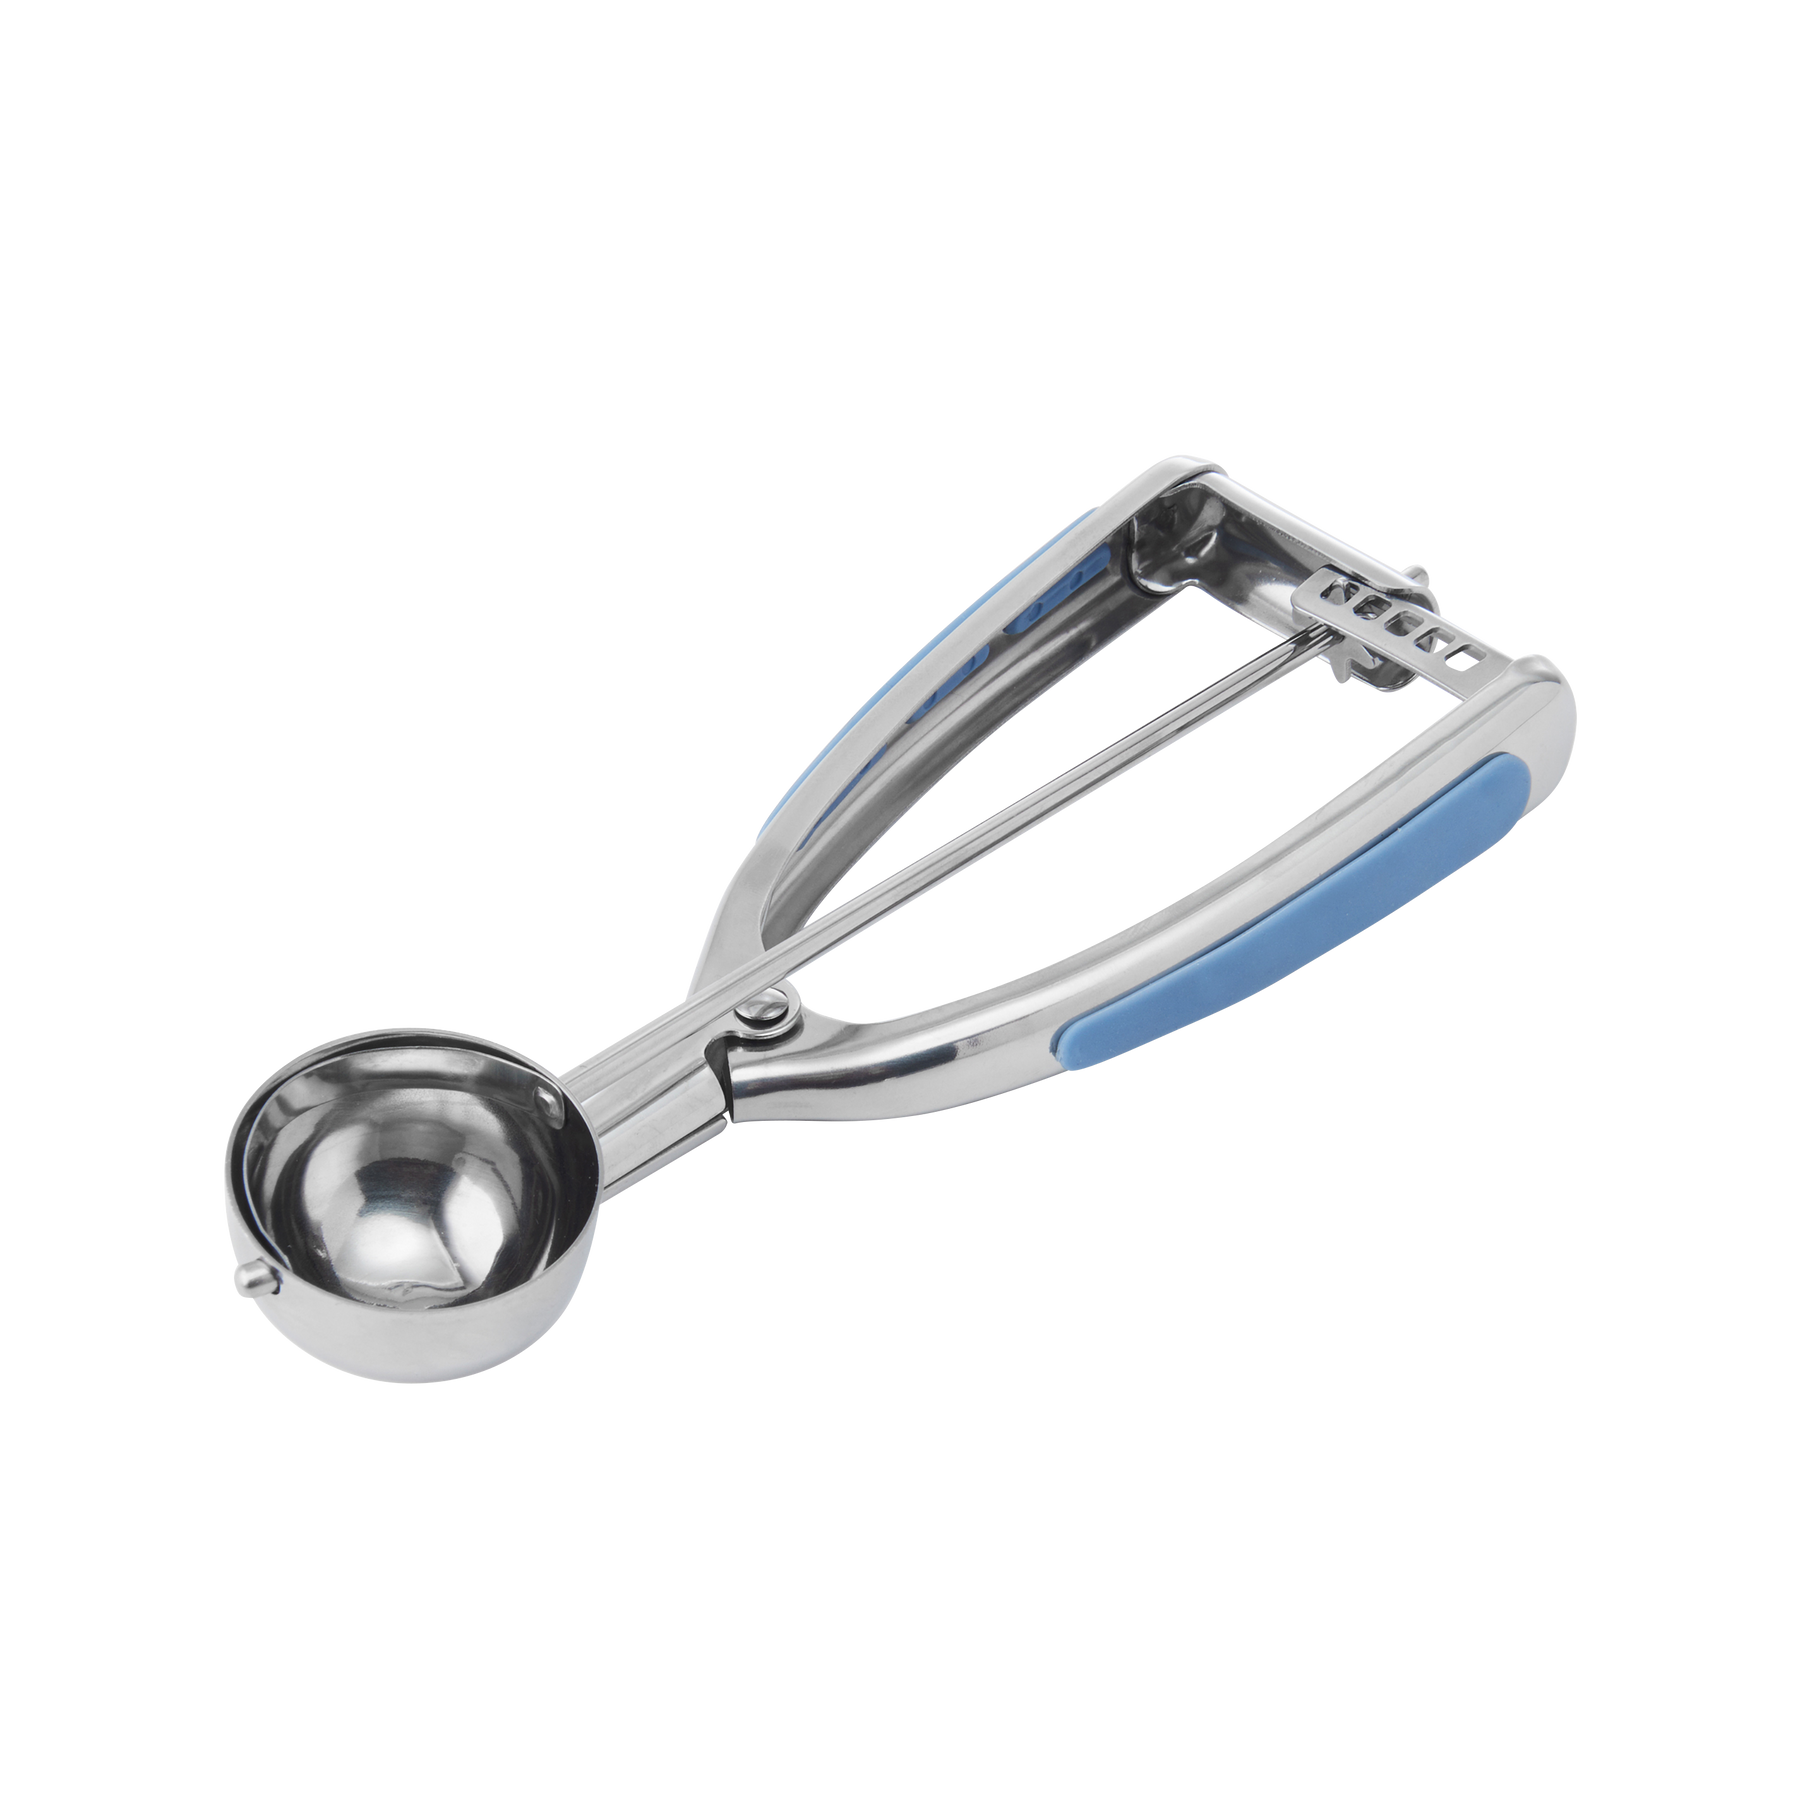 Stainless Steel Cookie Dough Scoop - Evelie Blu Boutique